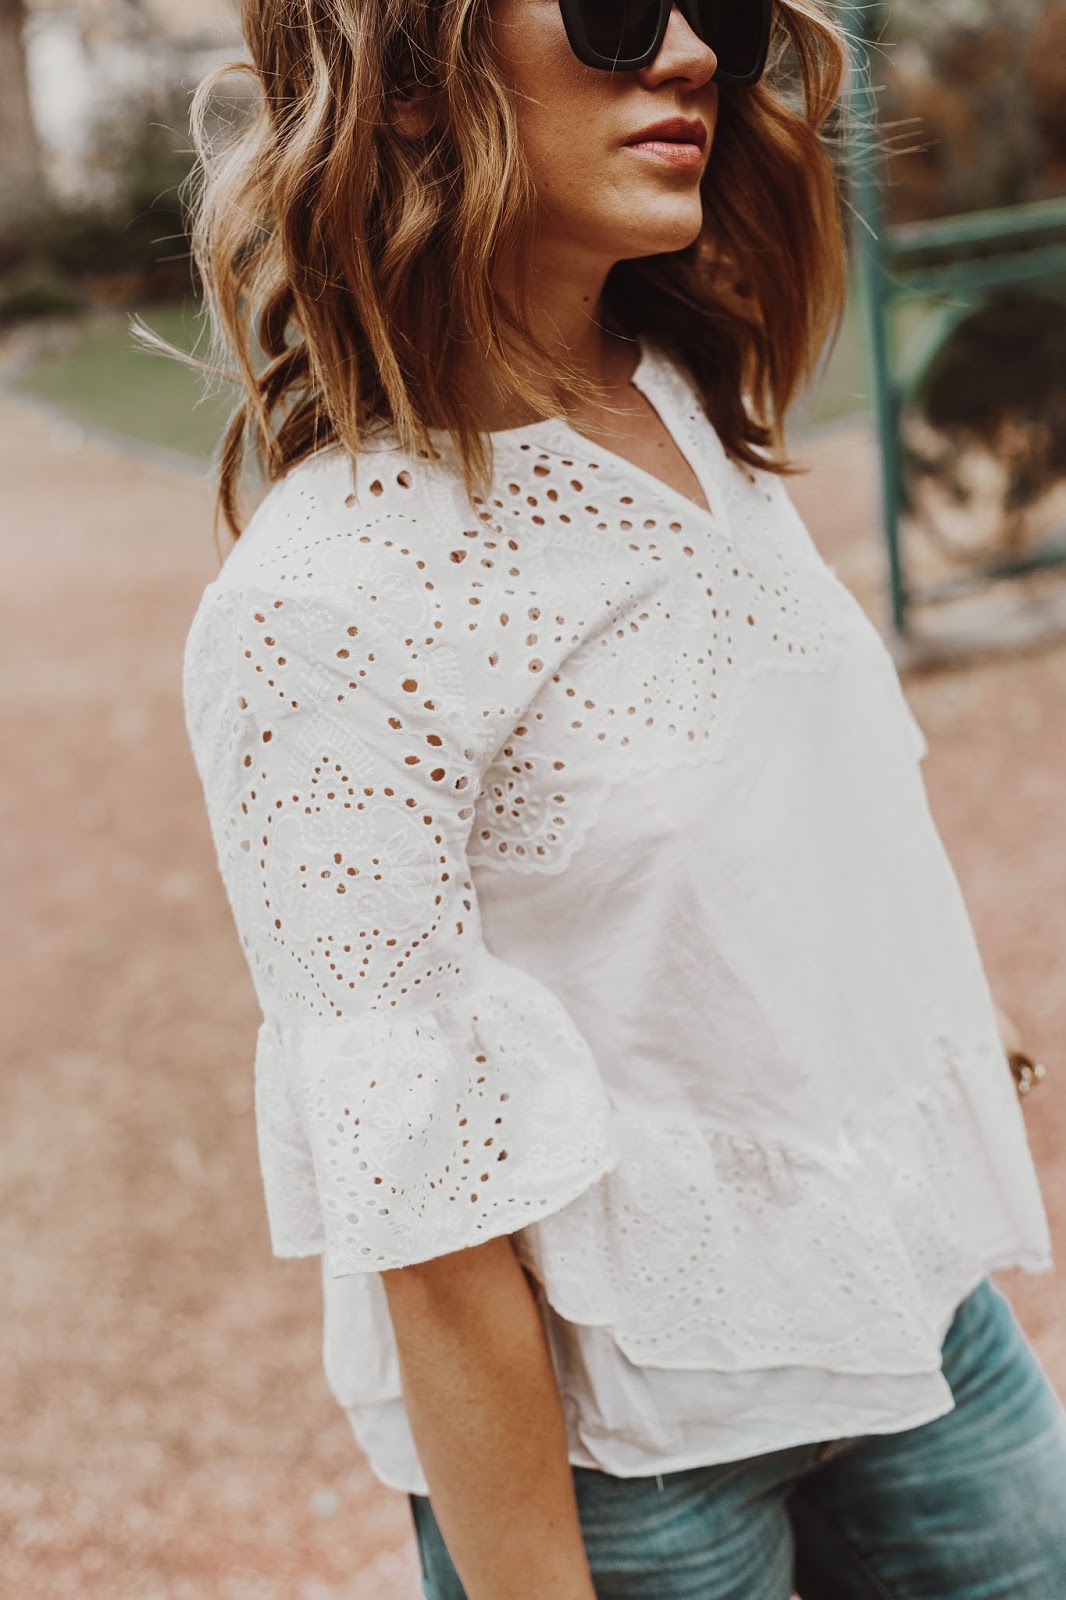 A Stunning White Eyelet Top - Leah Behr